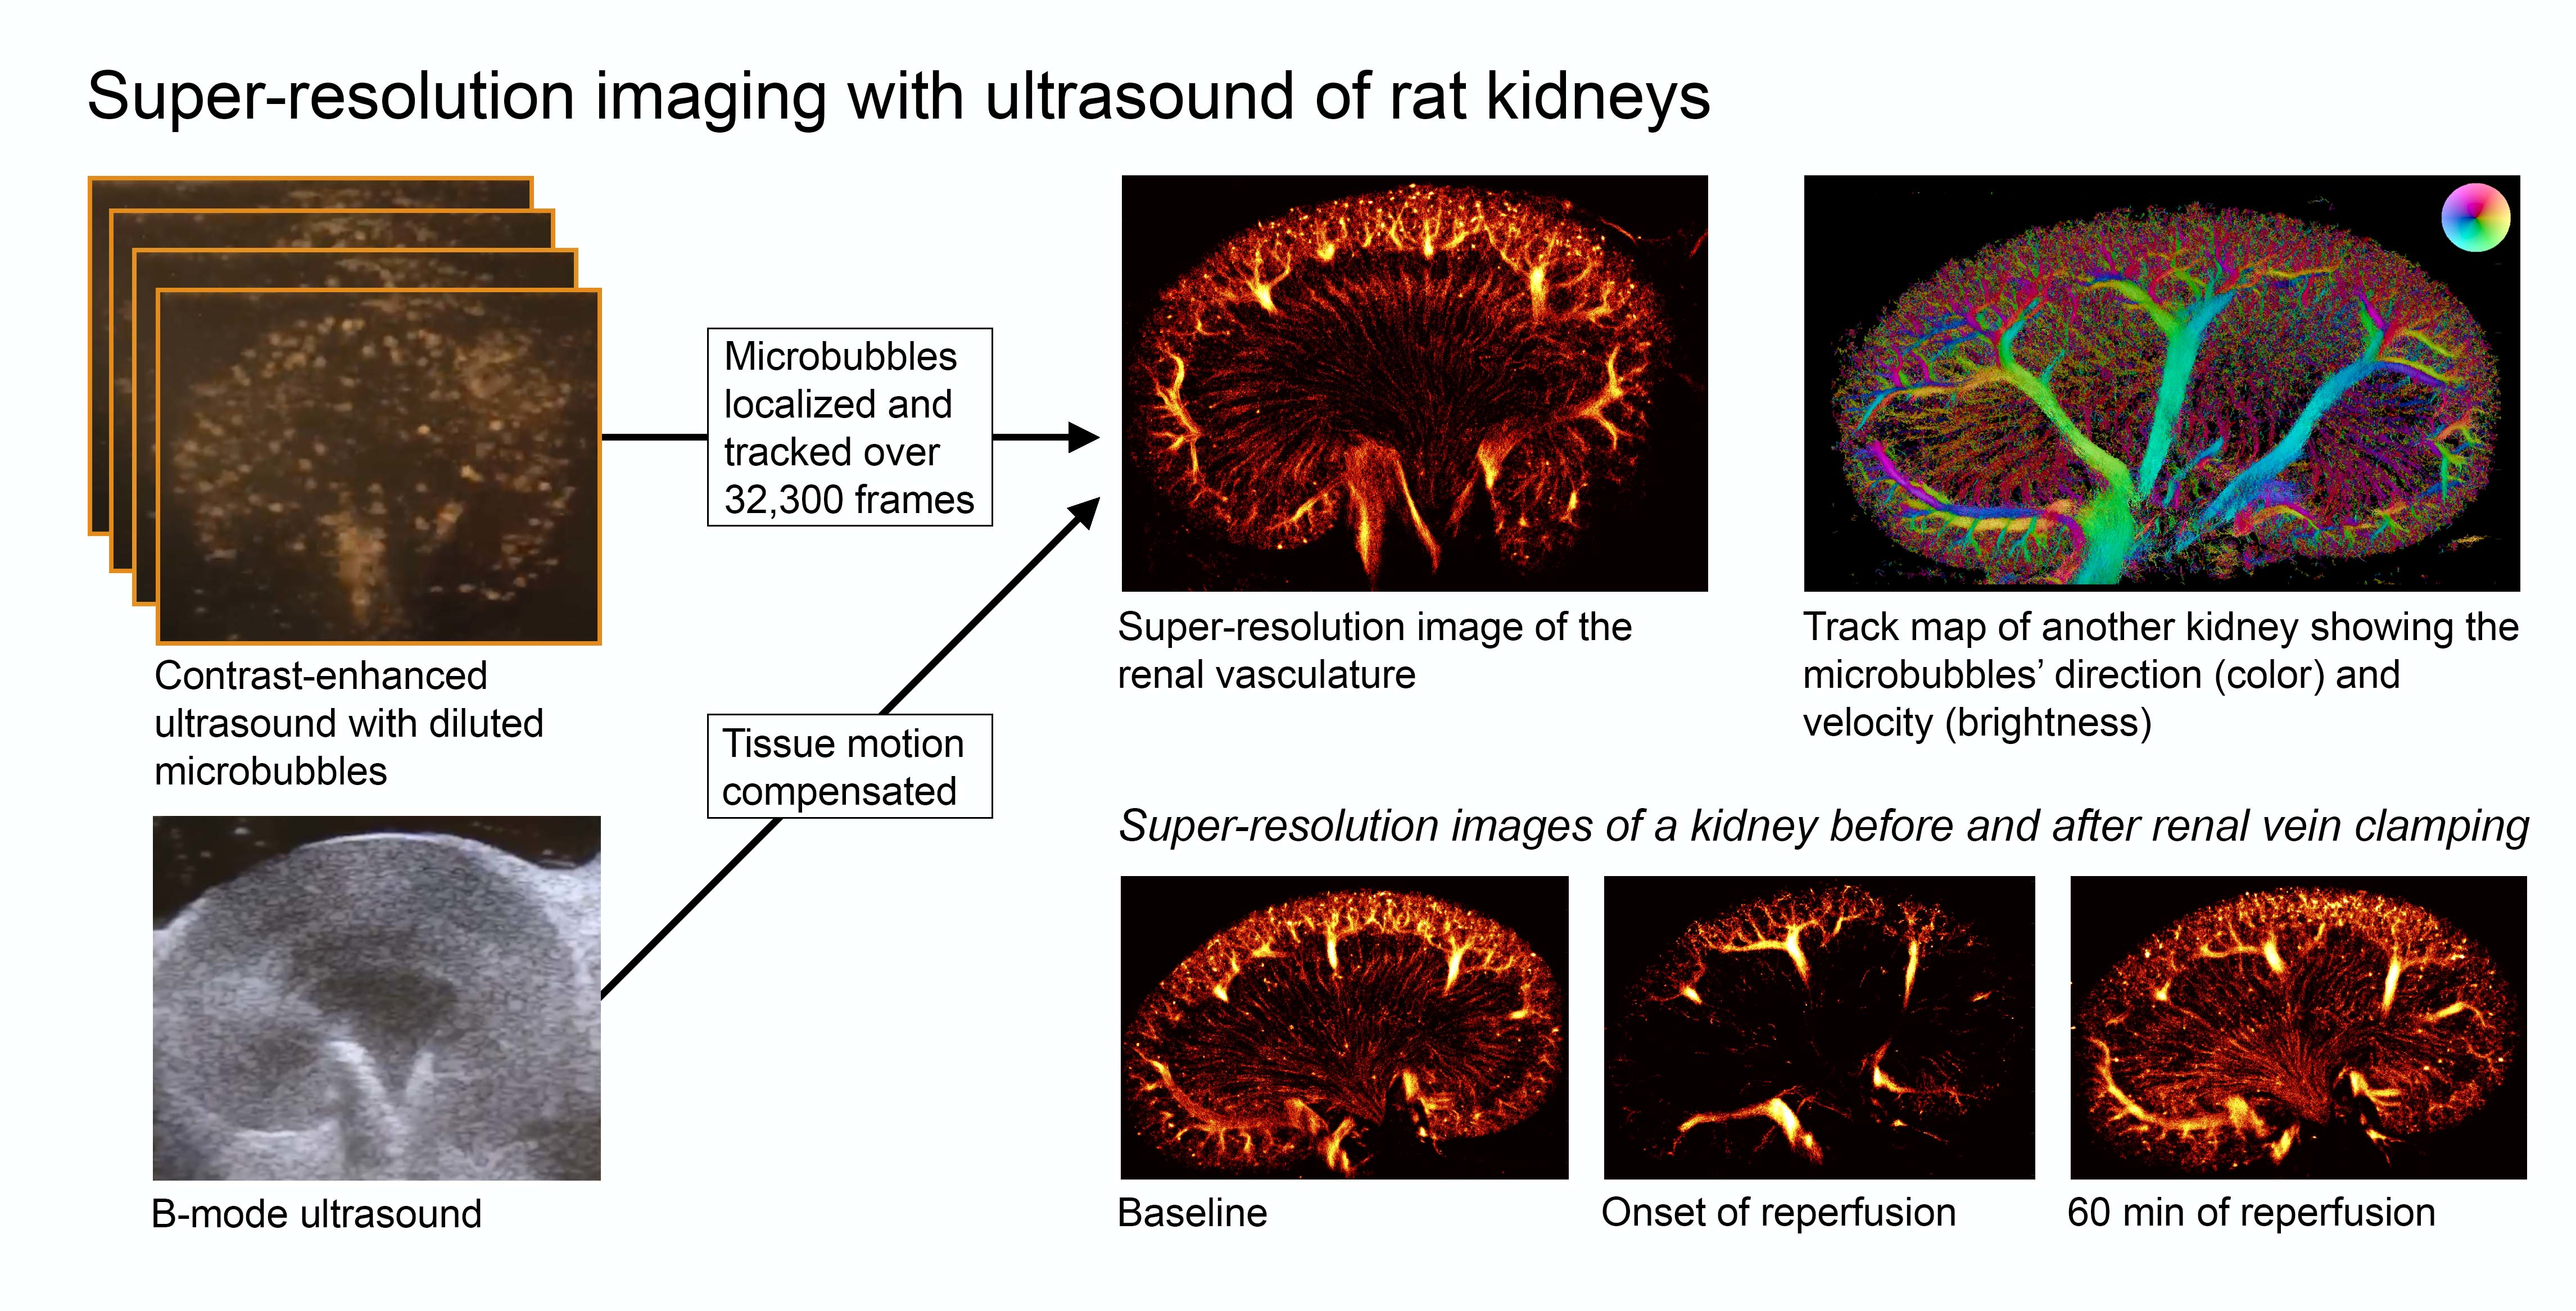 Diagnostics | Free | Super-Resolution Imaging with Ultrasound for Visualization the Renal Microvasculature in Before and After Renal Ischemia: A Study